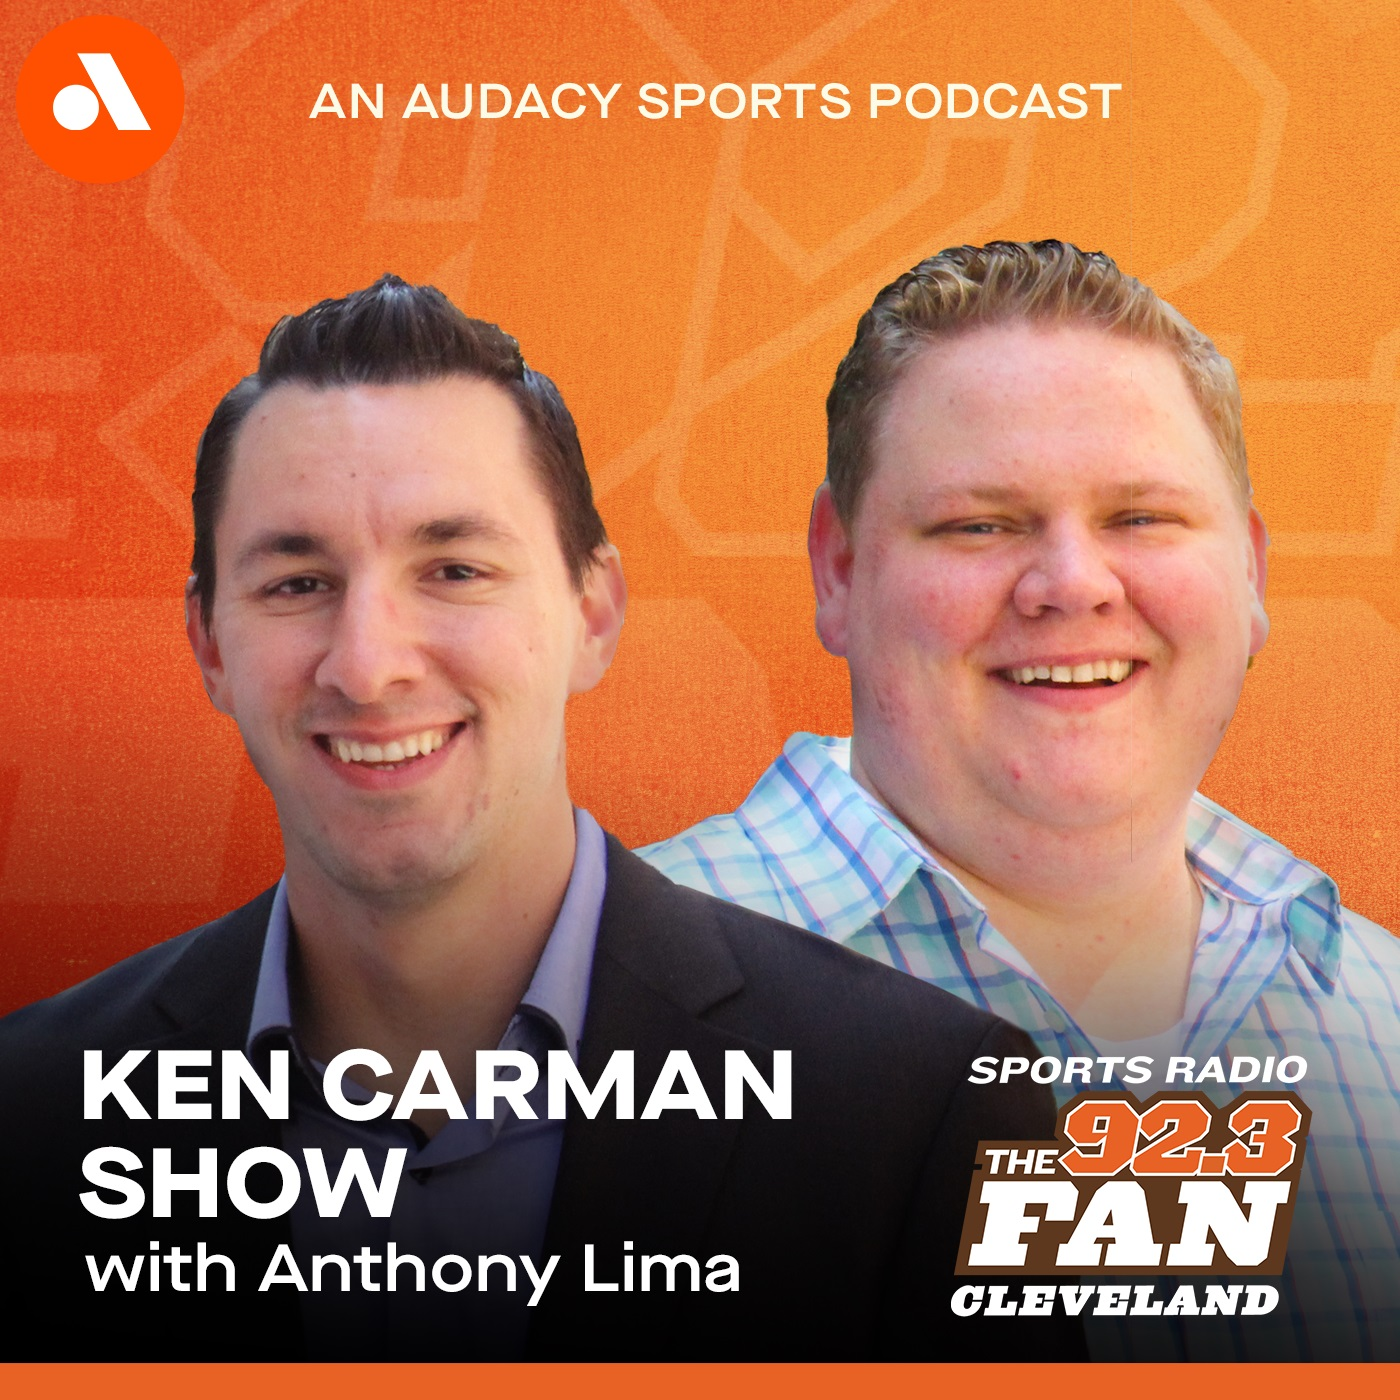 The Ken Carman Show with Anthony Lima reacts to Texans-Browns